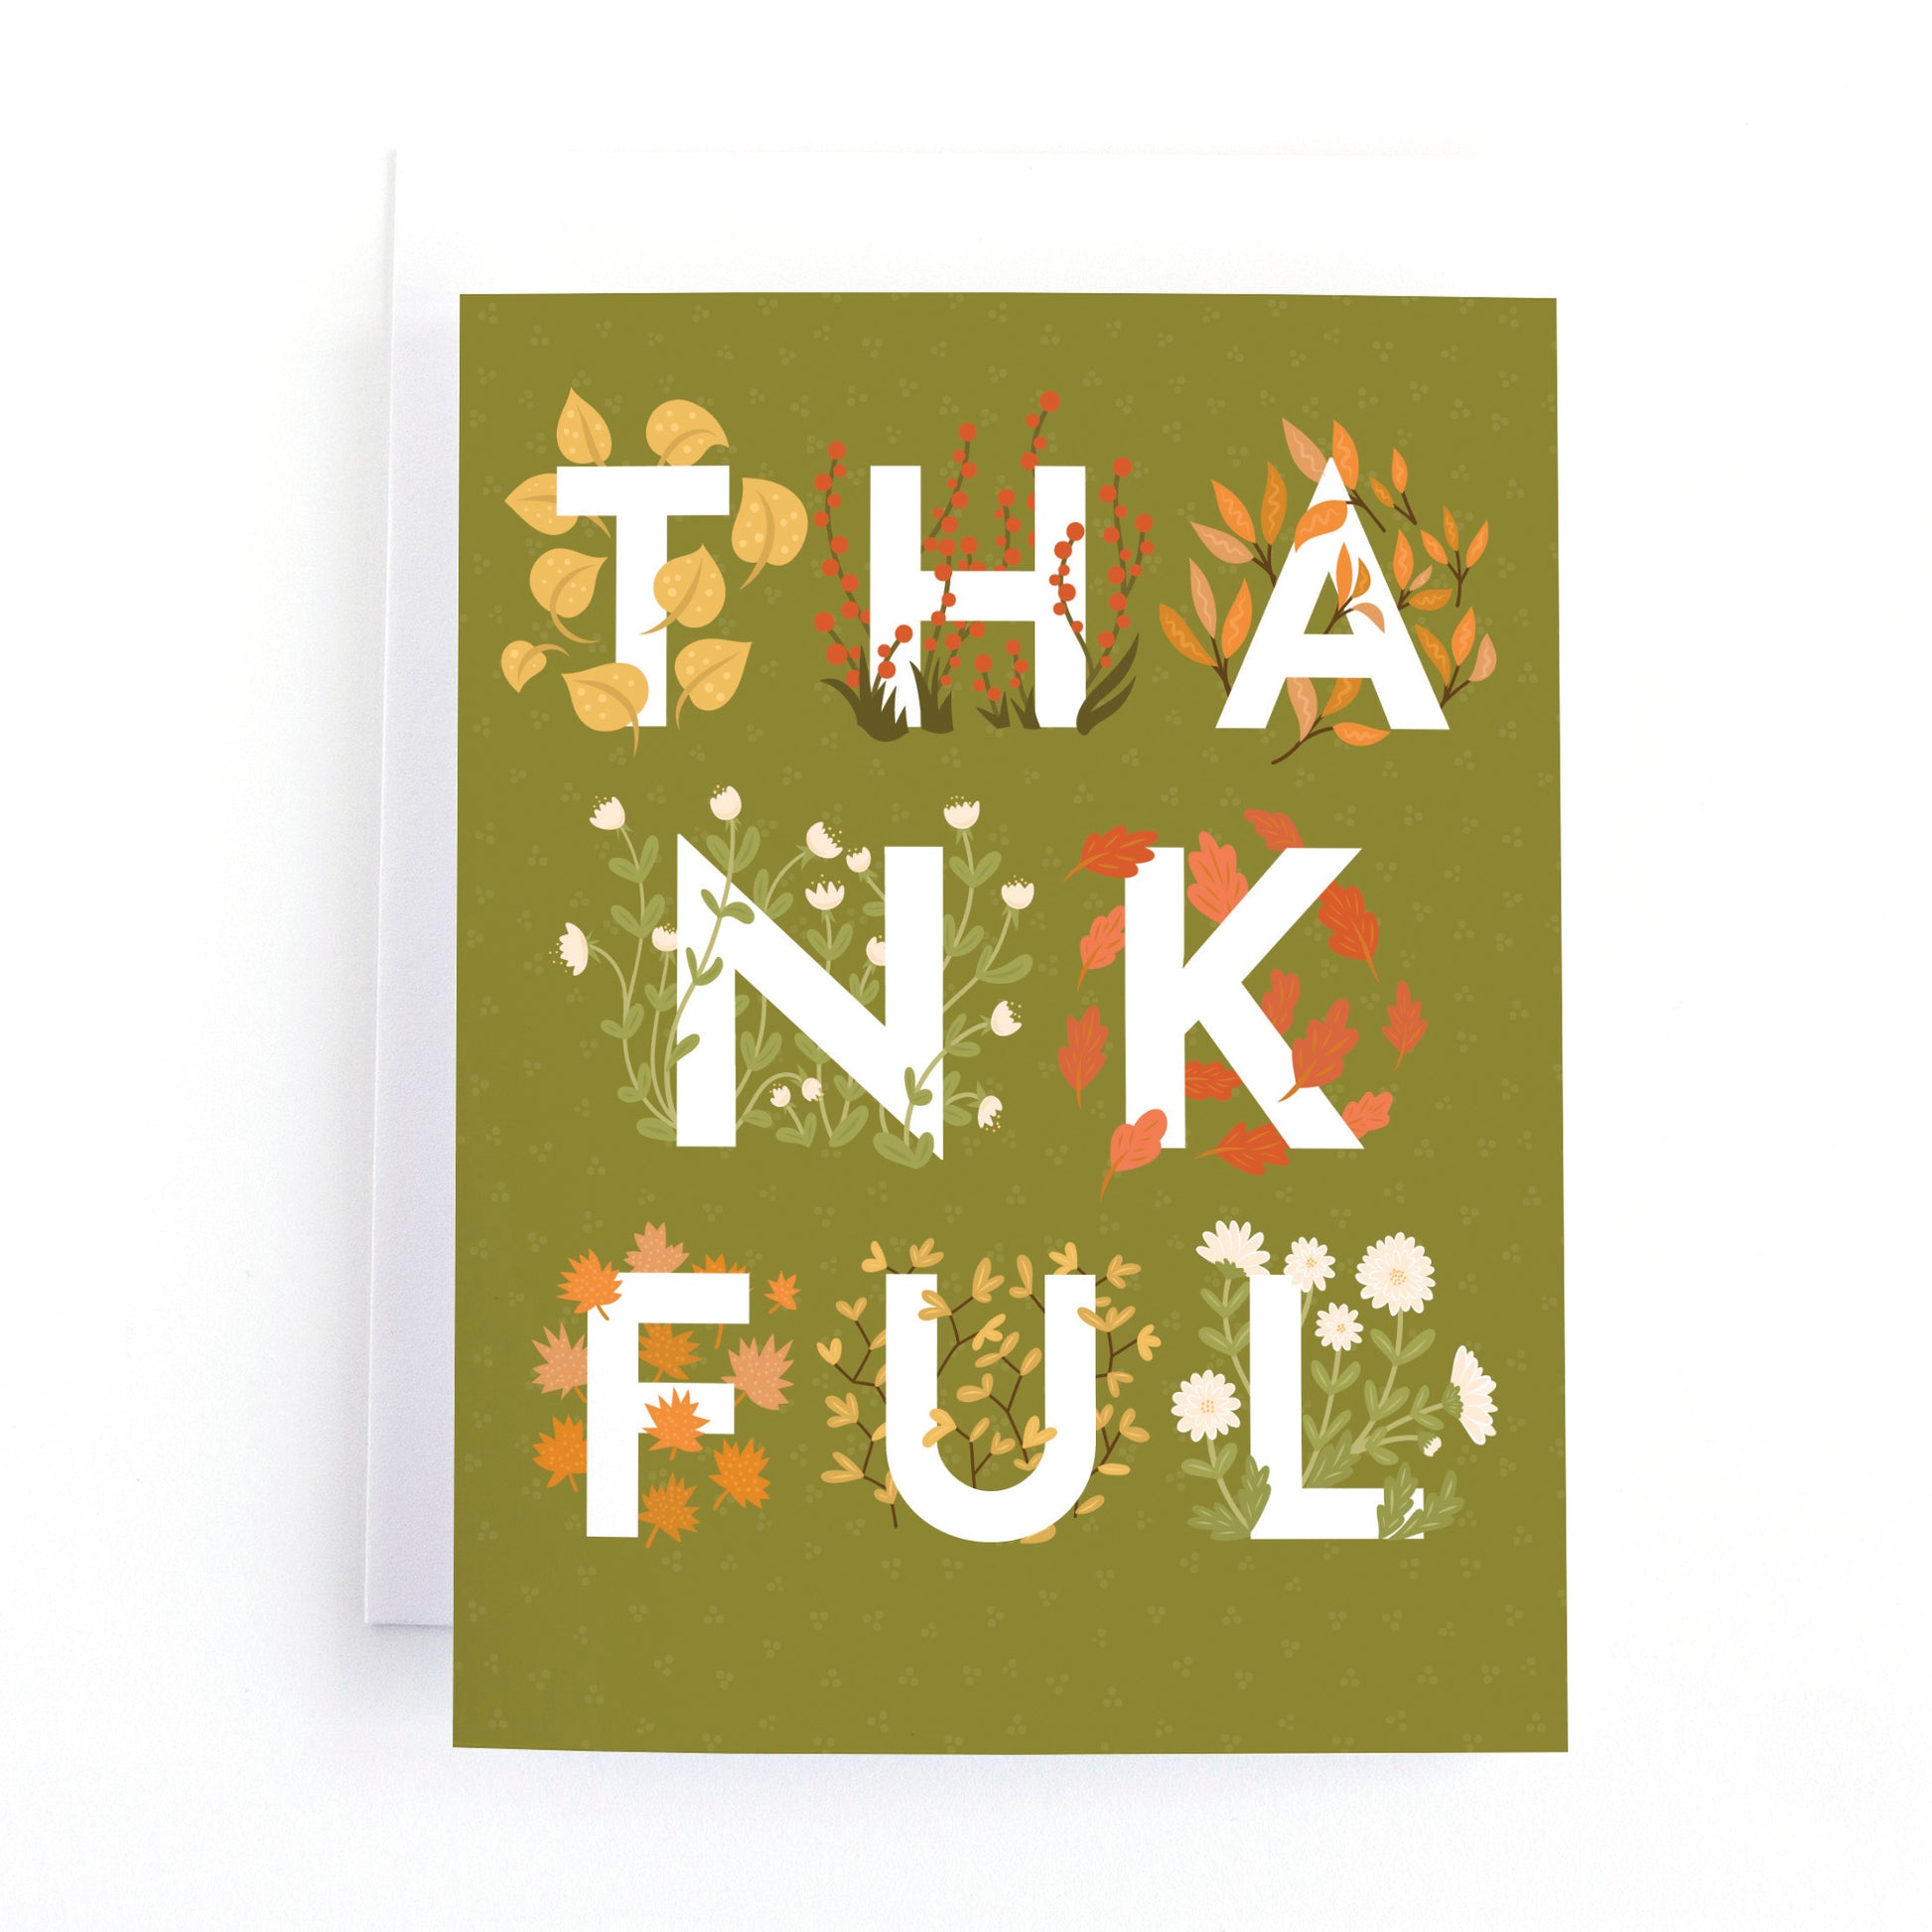 Thanksgiving card with fall leaves and flowers surrounding the word "thankful"